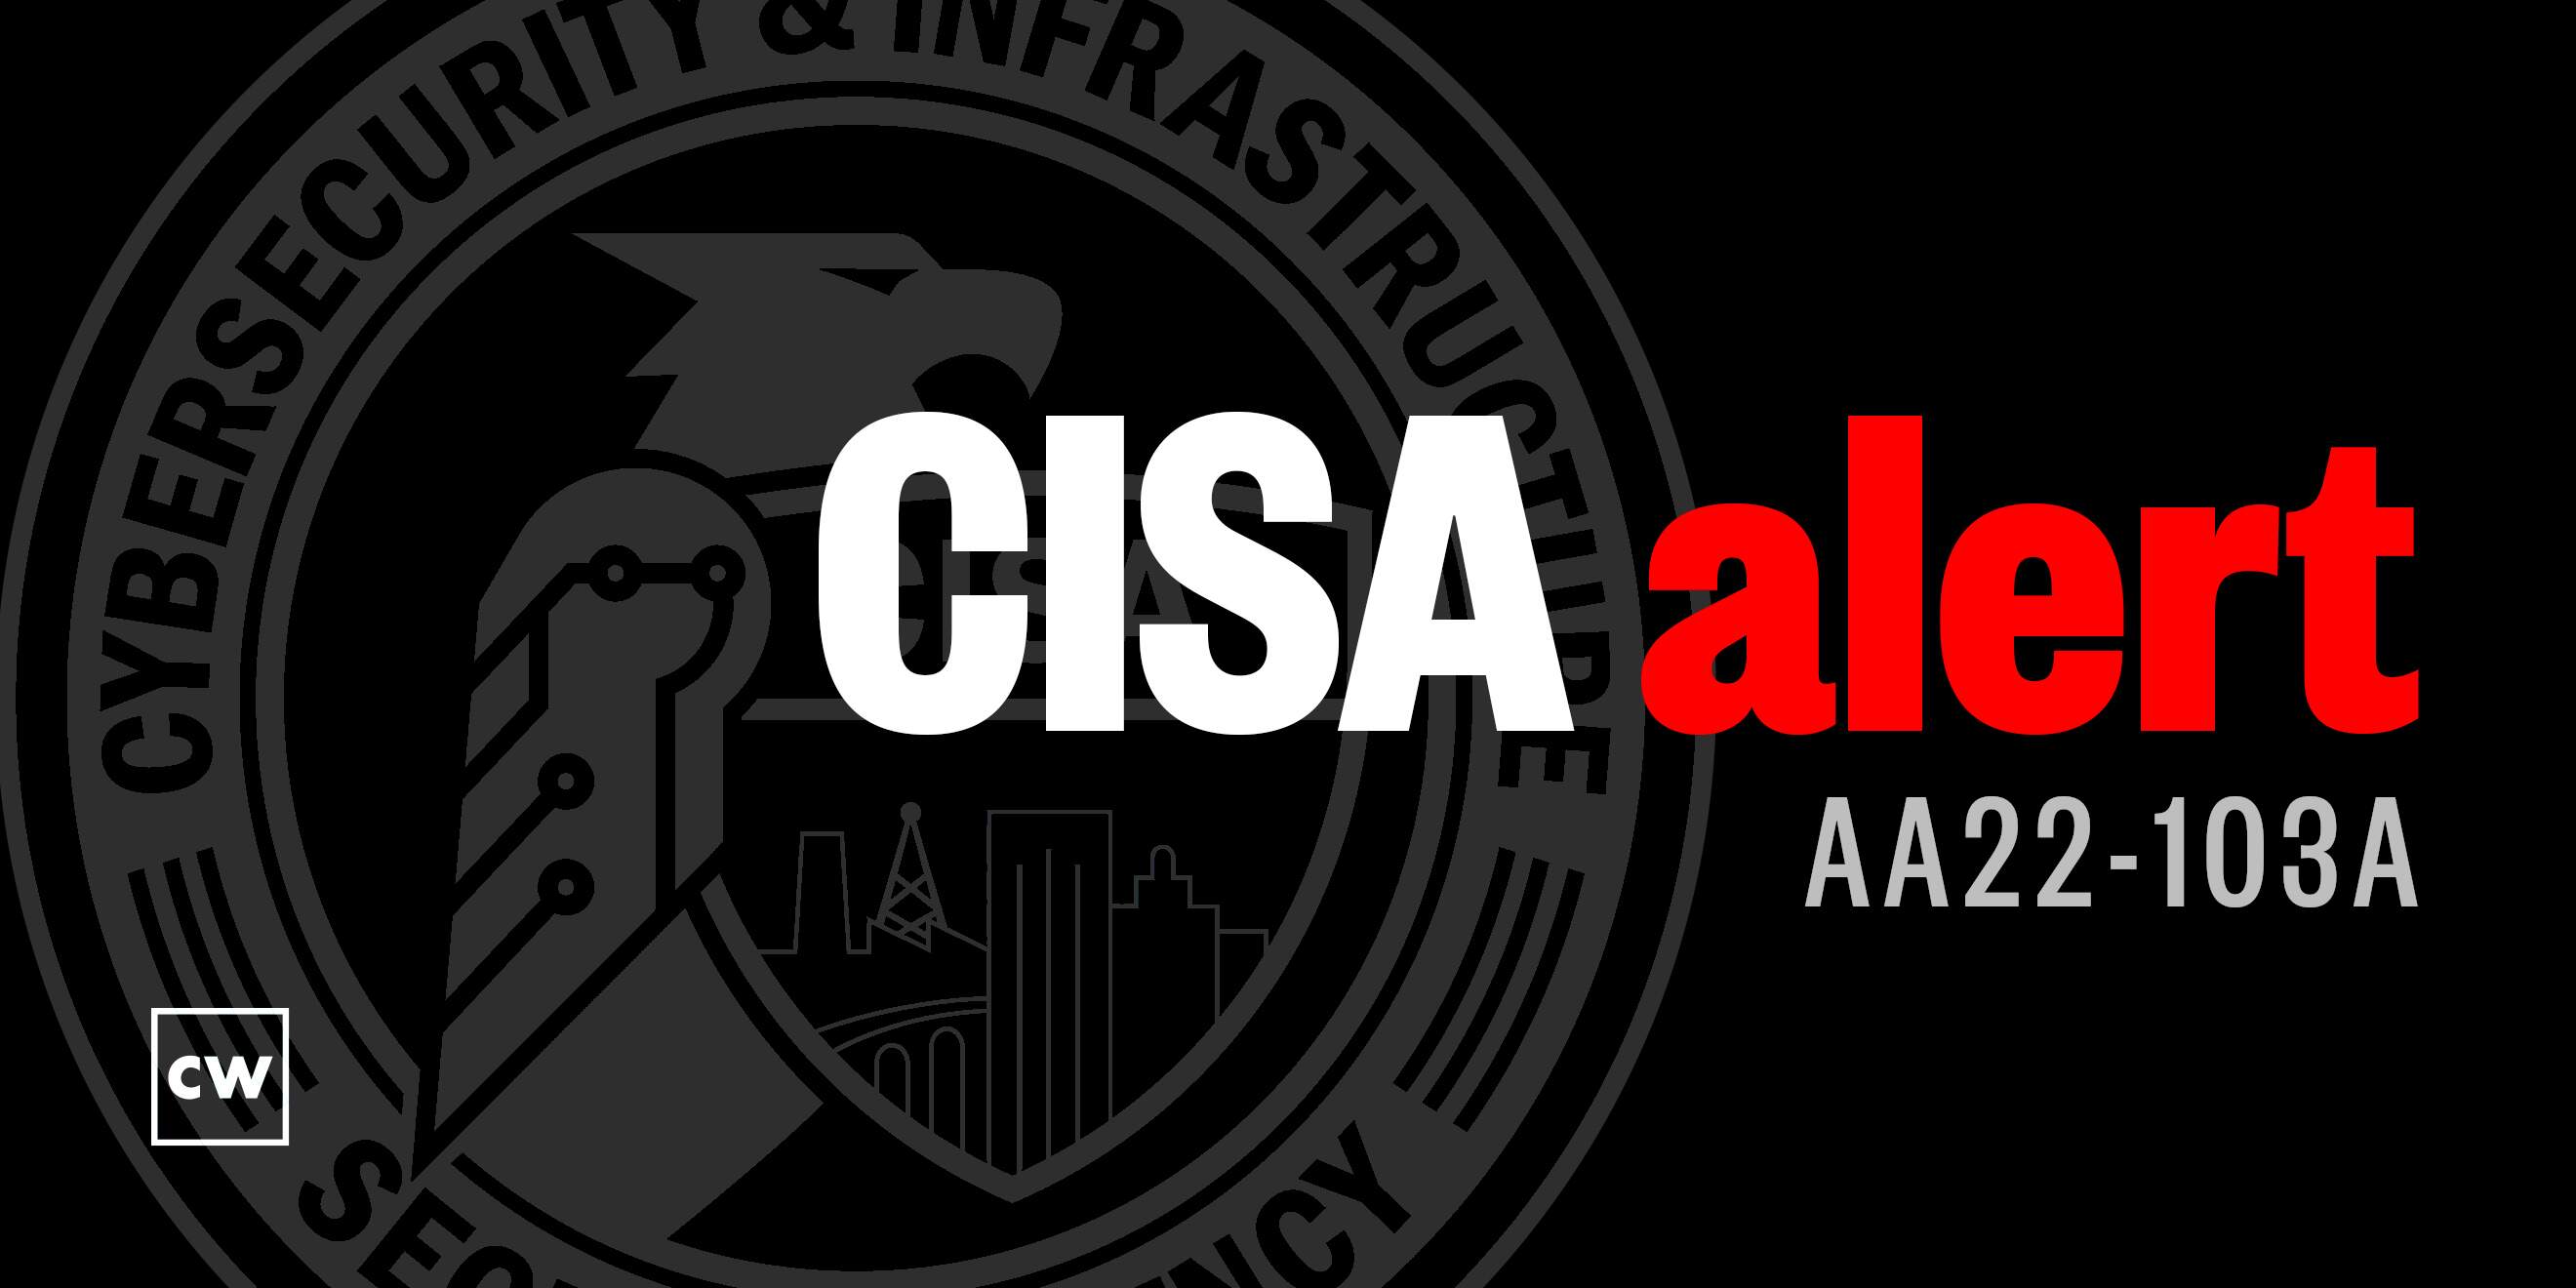 CISA Cybersecurity Alerts 4.13.22